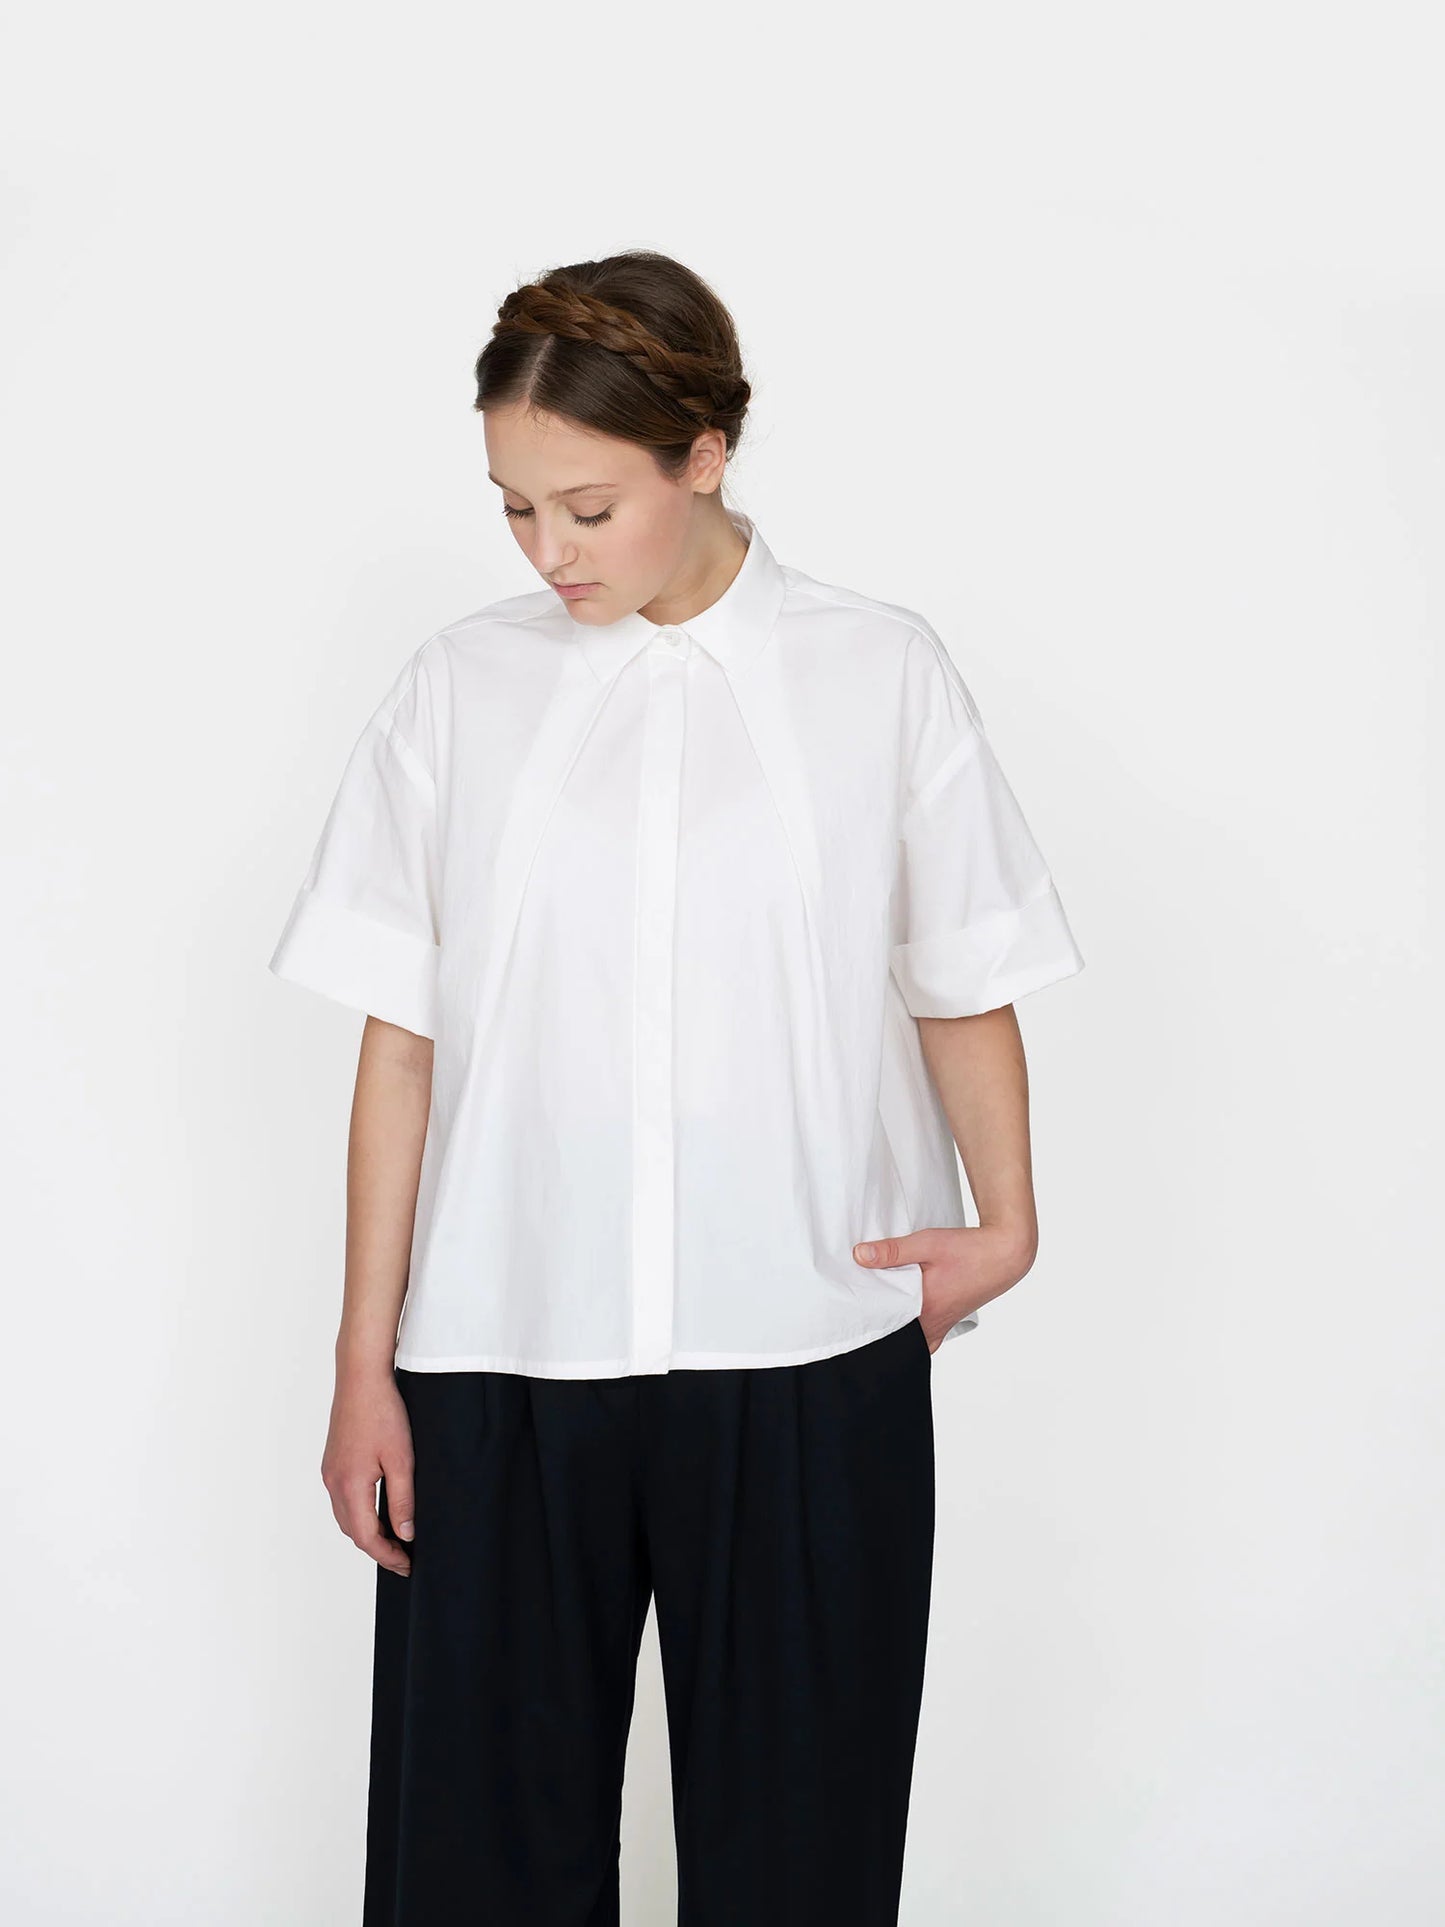 Front Pleat Shirt sewing pattern by The Assembly Line